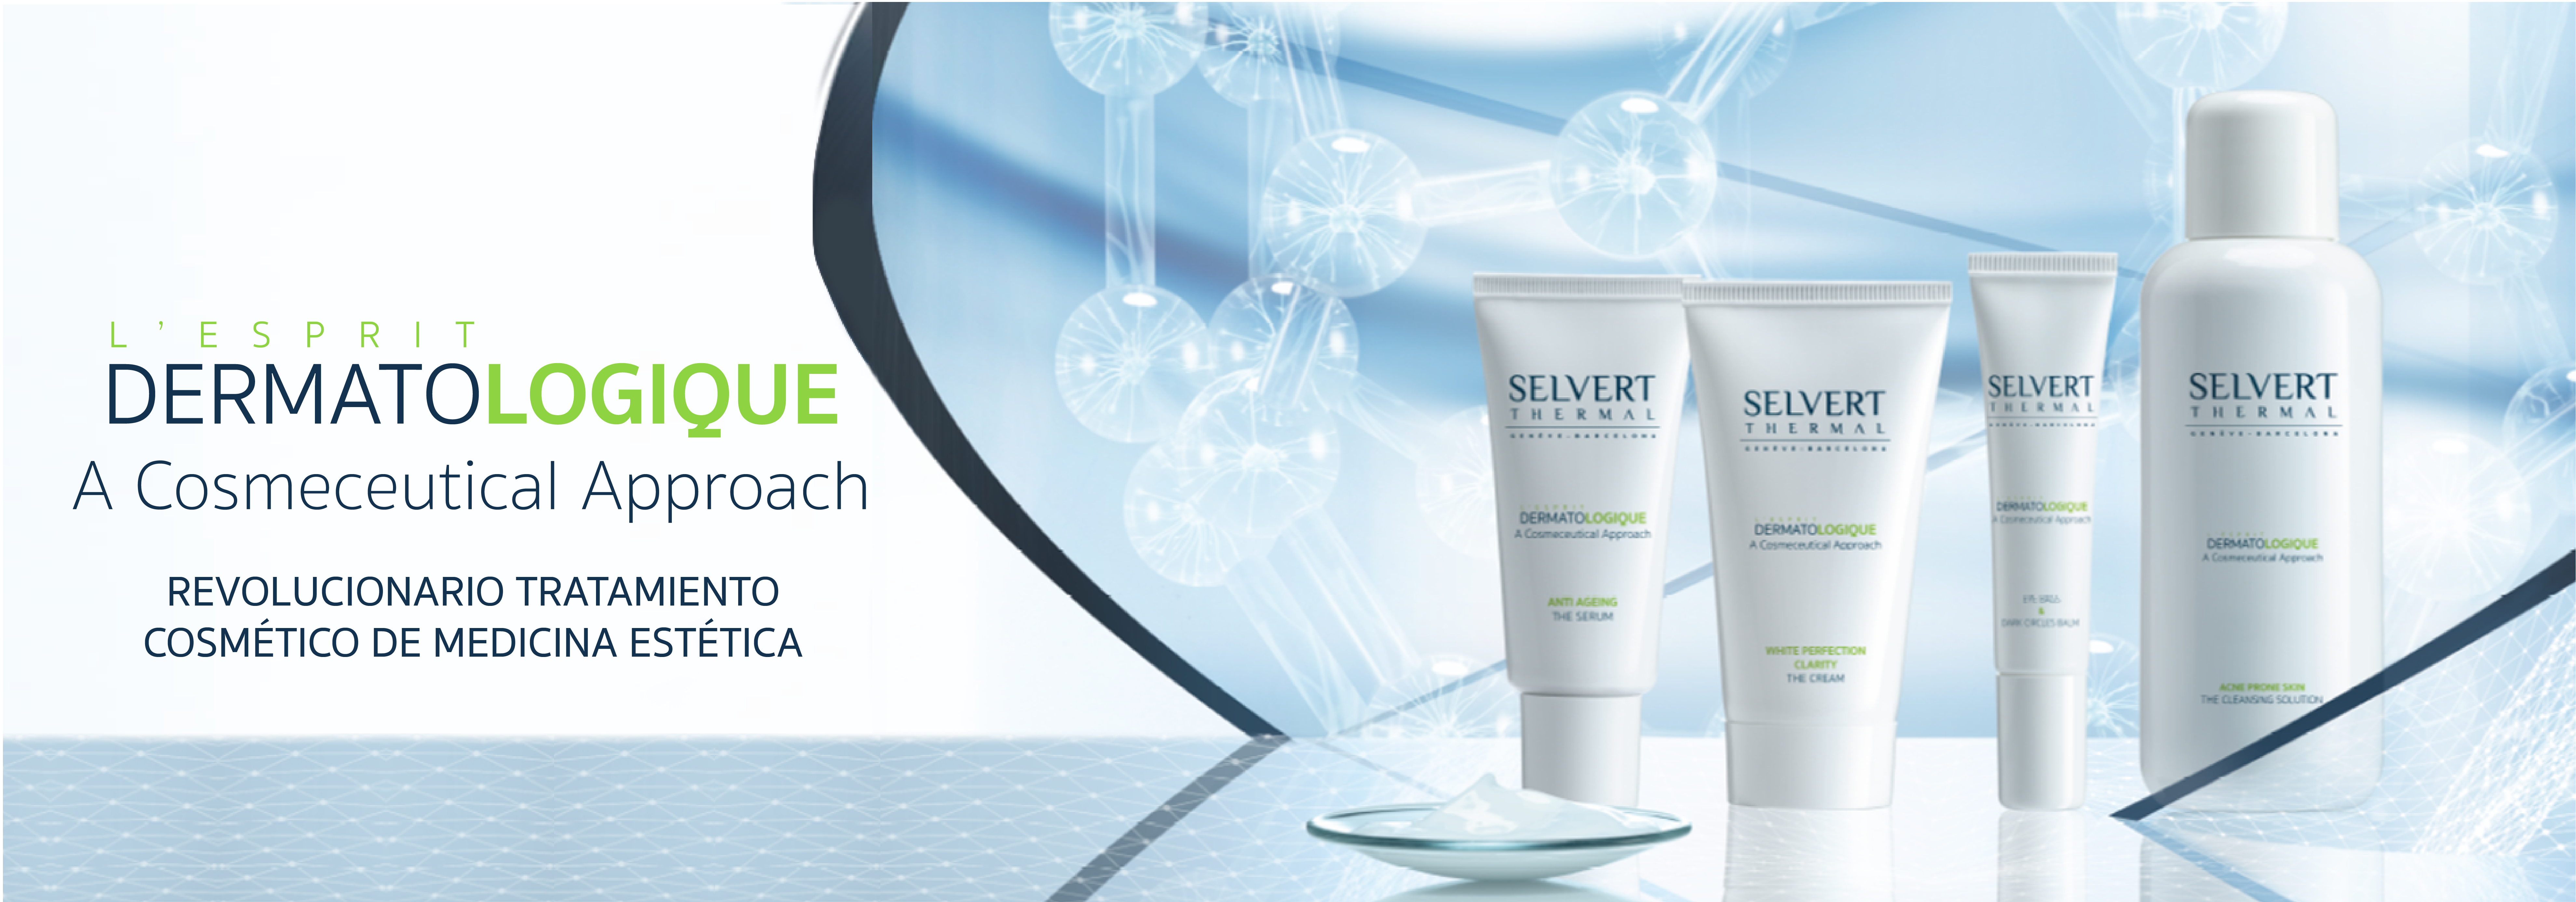 L'ESPRIT DERMATOLOGIQUE <h4 style="text-align: center;">NEW GENERATION OF COSMECEUTICAL PRODUCTS</h4>
<p style="text-align: justify;">&nbsp;</p>
<p style="text-align: justify;">Always at the leading edge of professional cosmetics, SELVERT THERMAL presents a new generation of cosmeceutical products inspired in aesthetic medicine, with safe and effective formulas to treat the different dysfunctions of the skin.</p>
<p style="text-align: justify;">Their high concentrations, both in the beauty professional products and in the home care retail products, and the perfect combination of state-of-the-art active agents such as C-60 and proteoglycans, allow visible results to be obtained from the first applications.</p>